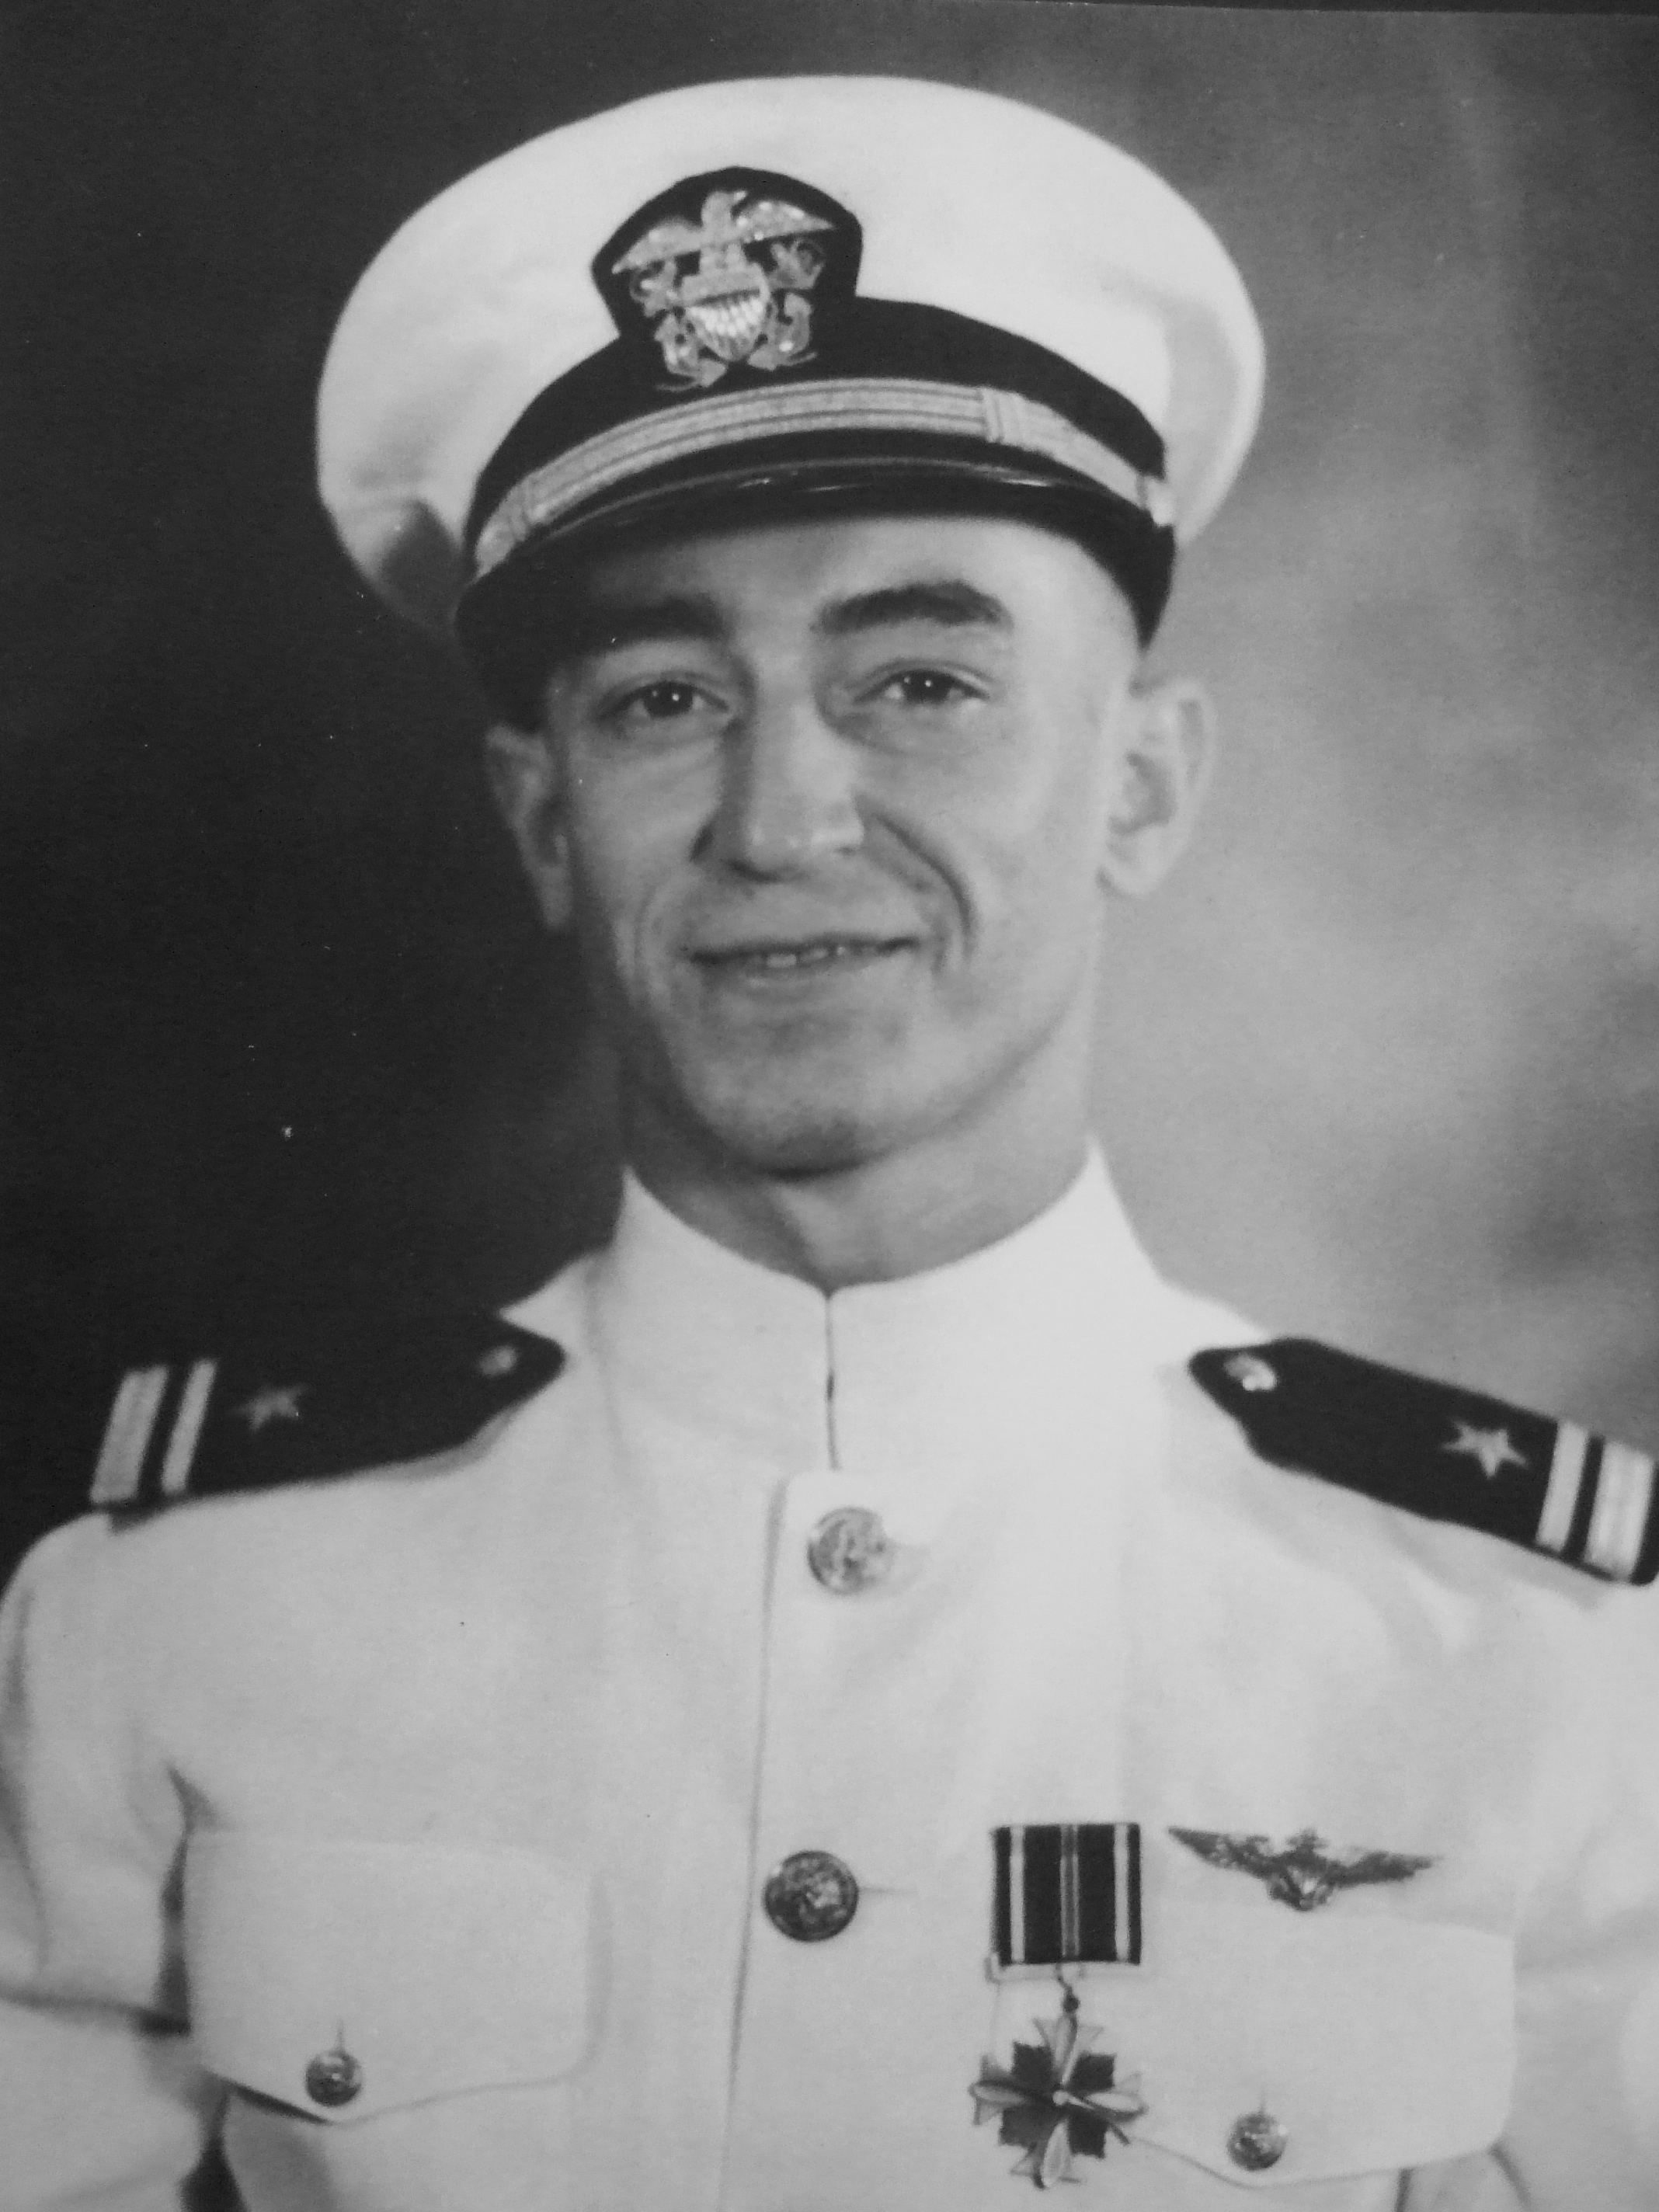 Portrait of Jack Kleiss, 27 May 1942